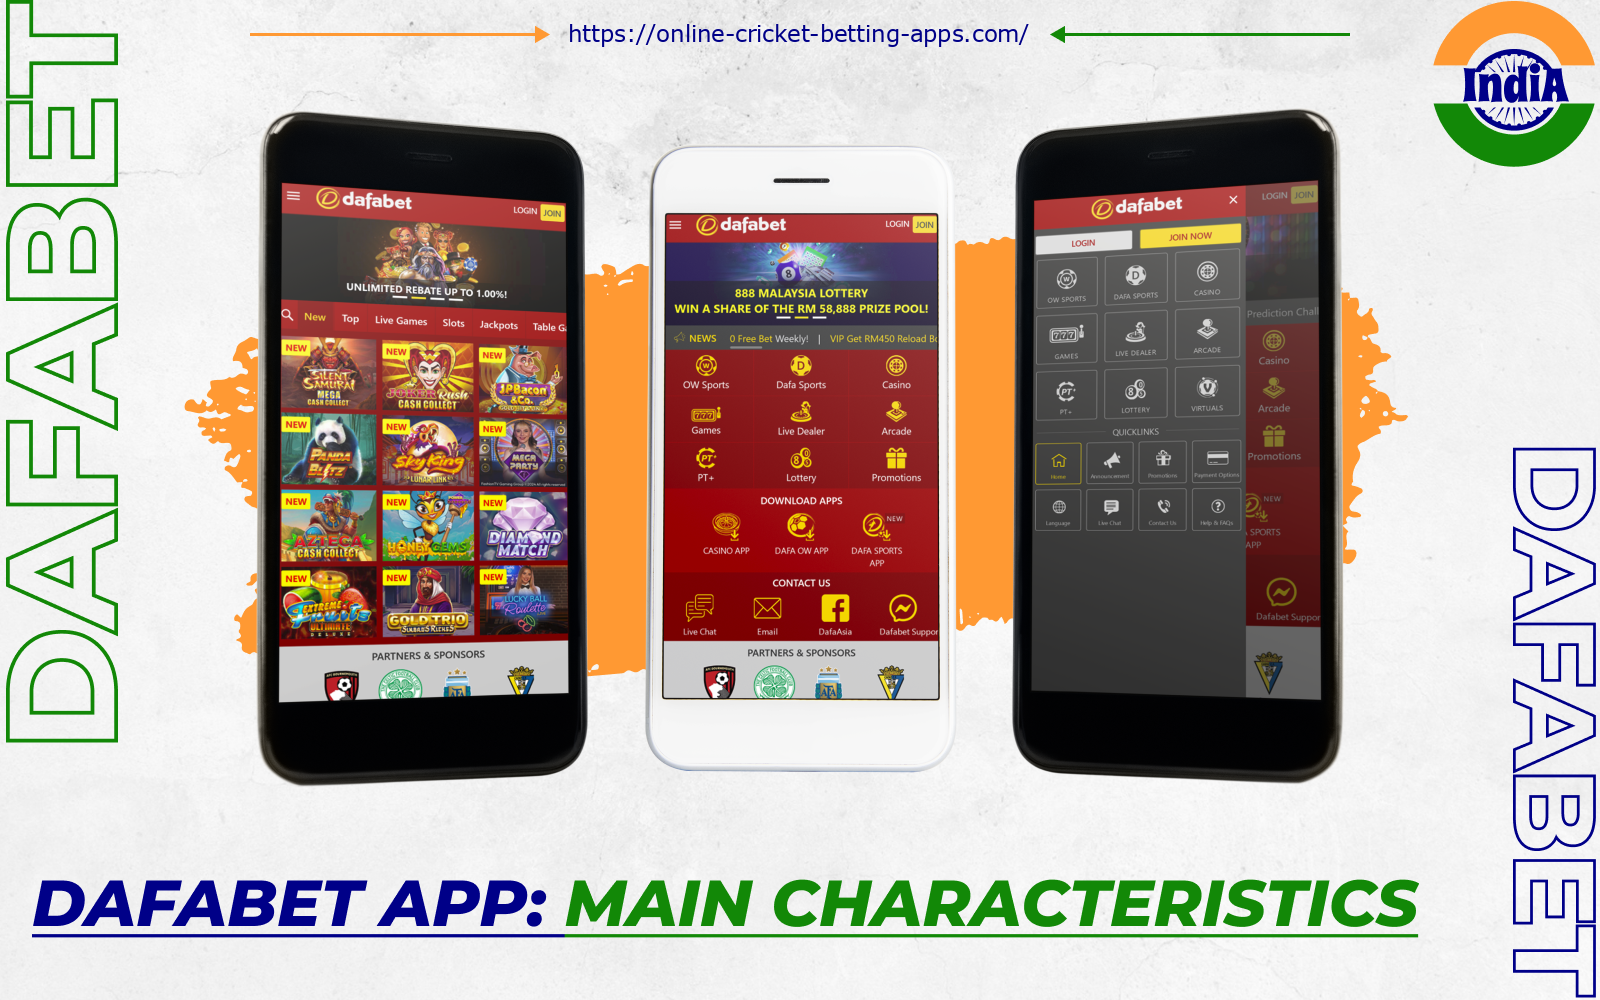 Dafabet India app has a wide range of options for betting or casino games and works as fast as possible